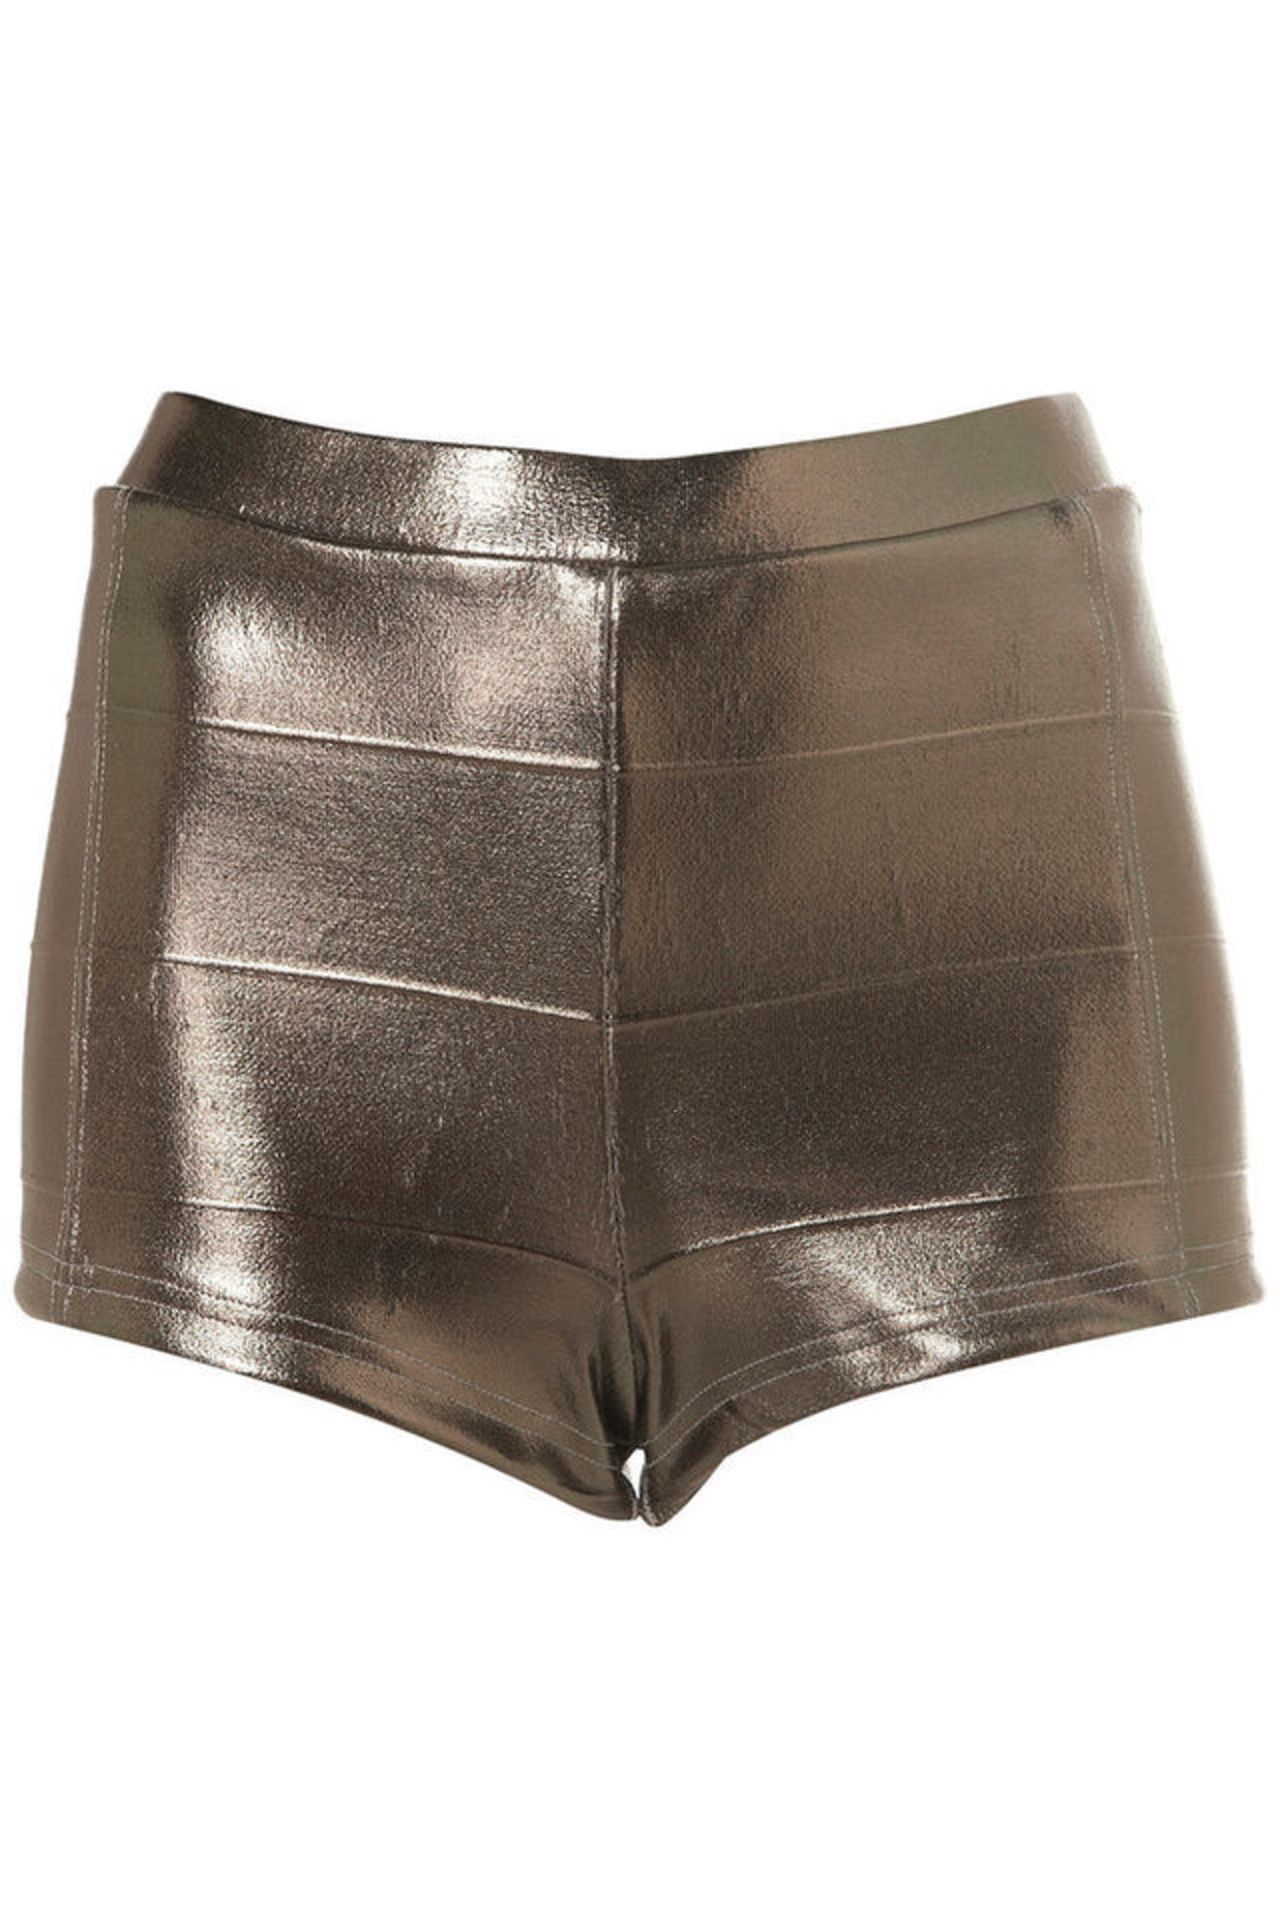 New Tags In Bags Topshop Ladies Khaki Foil Knickers Hot Pants Shorts x 36 RRP £726 - Image 3 of 3